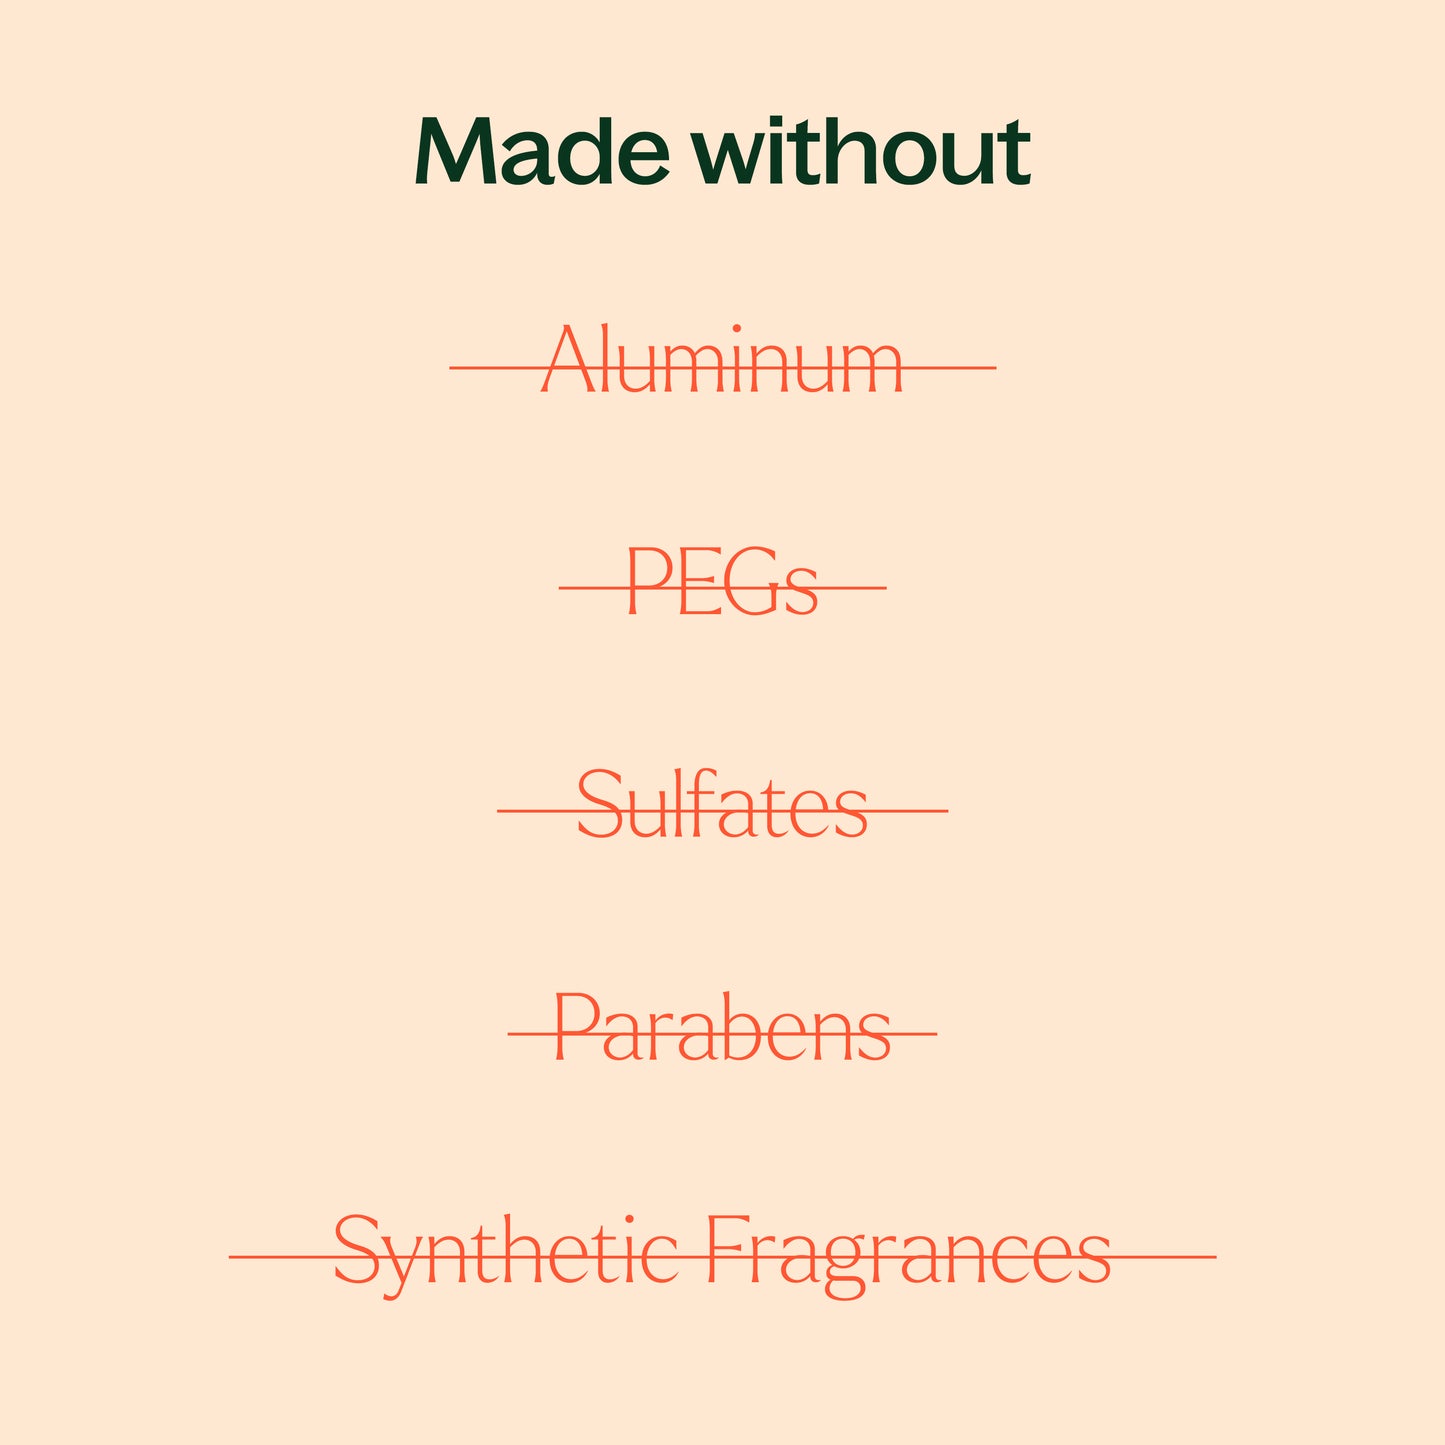 made without aluminum, PEGs, sulfates, parabens, synthetic fragrances